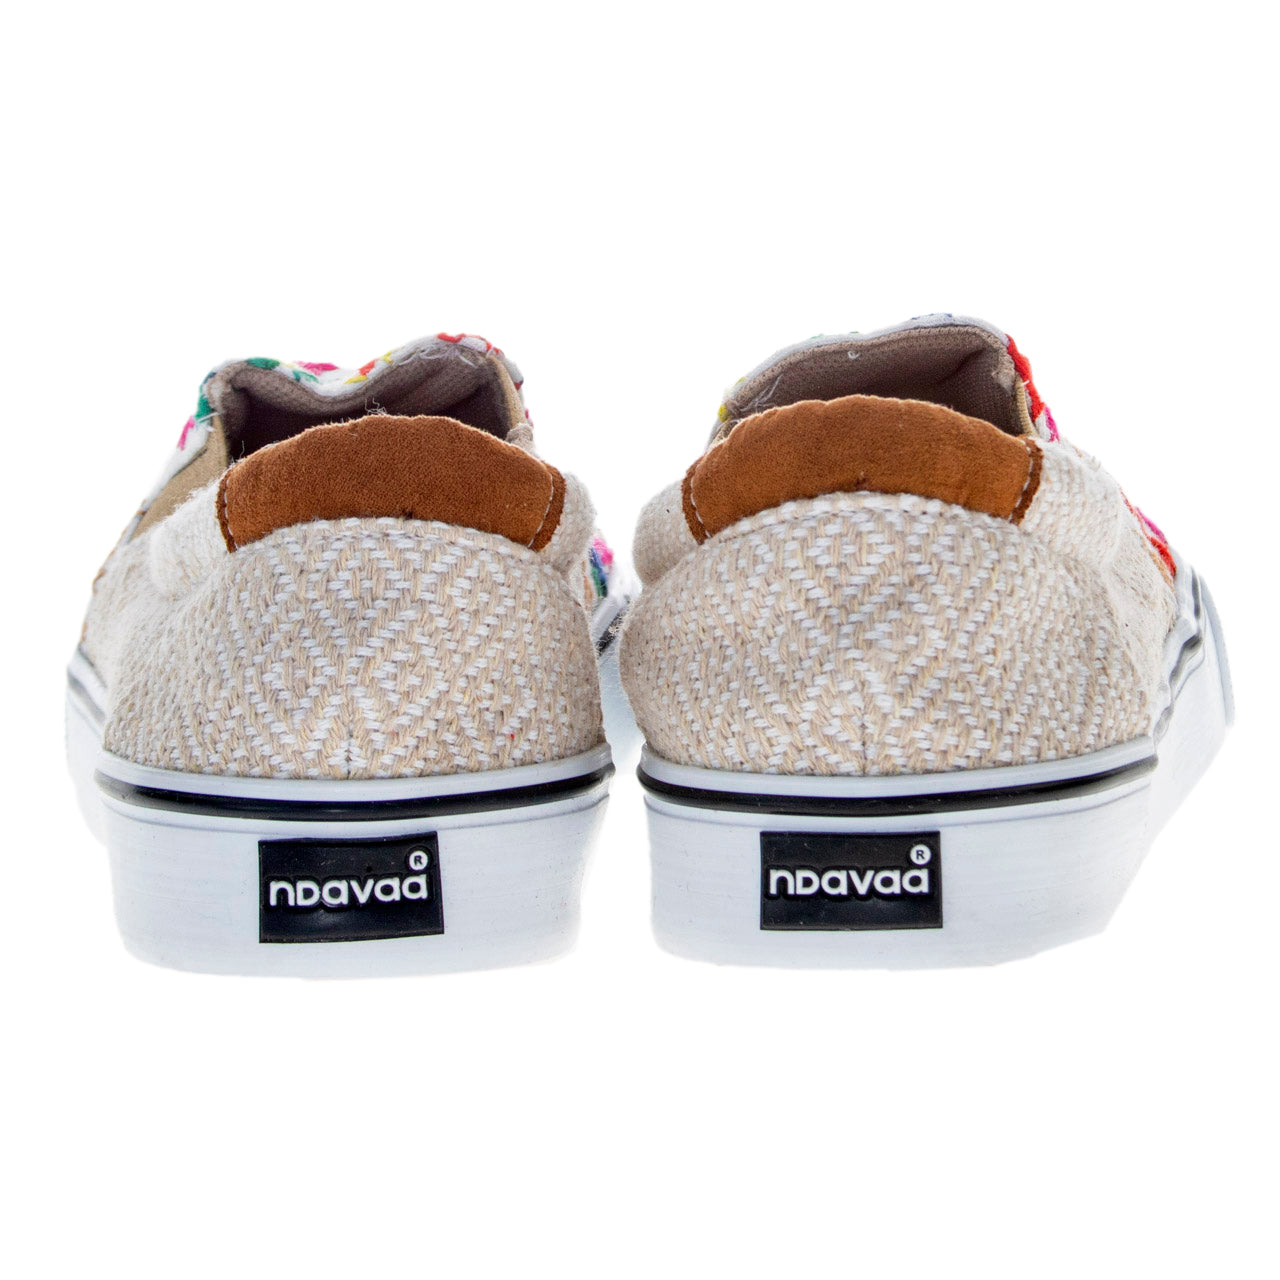 Nosotros Embroidered Slip-On Sneakers